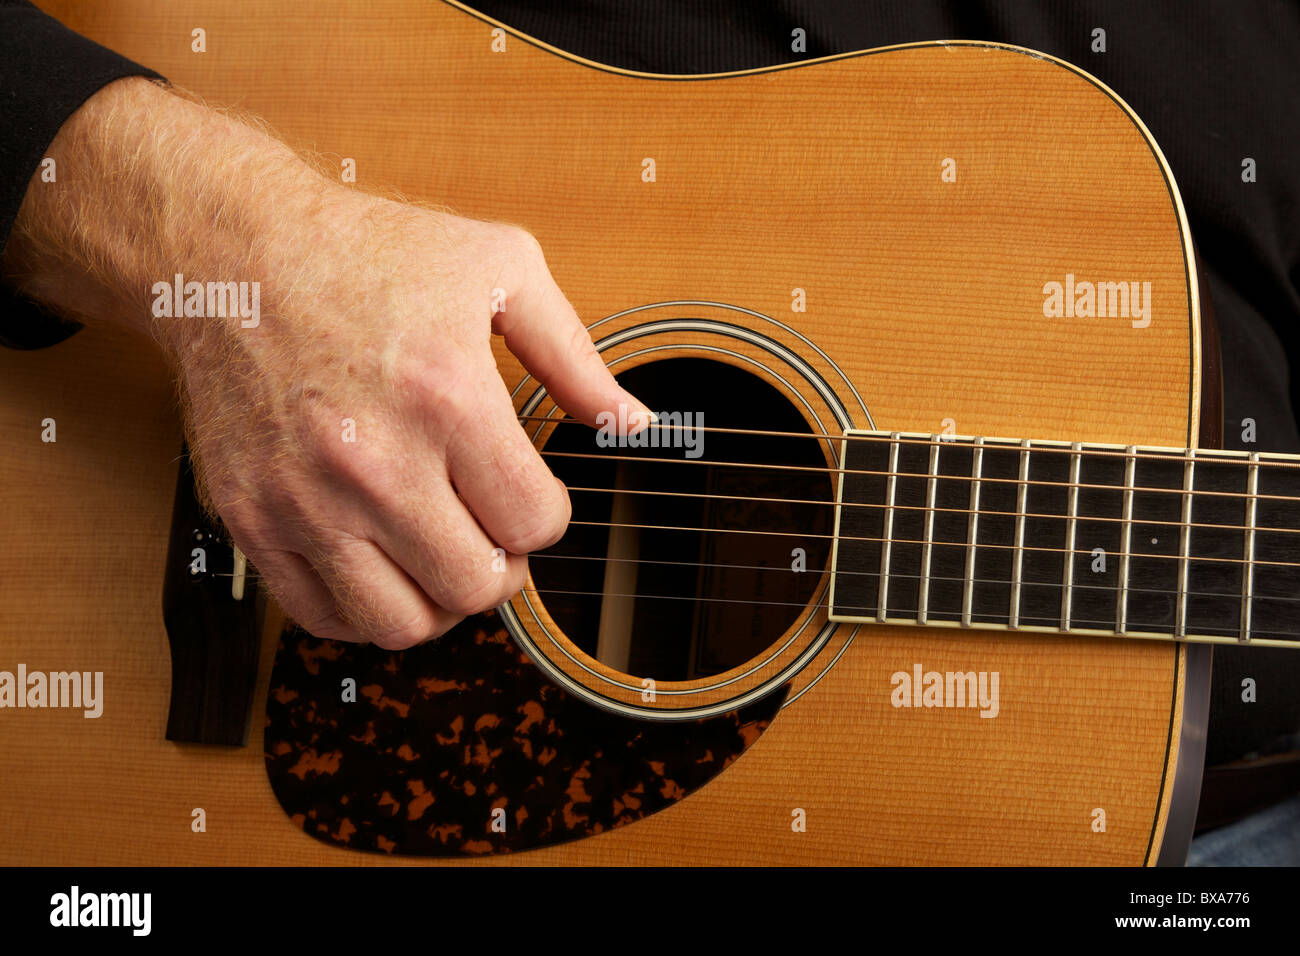 Man playing guitar. Close up of right hand and sound box. Stock Photo